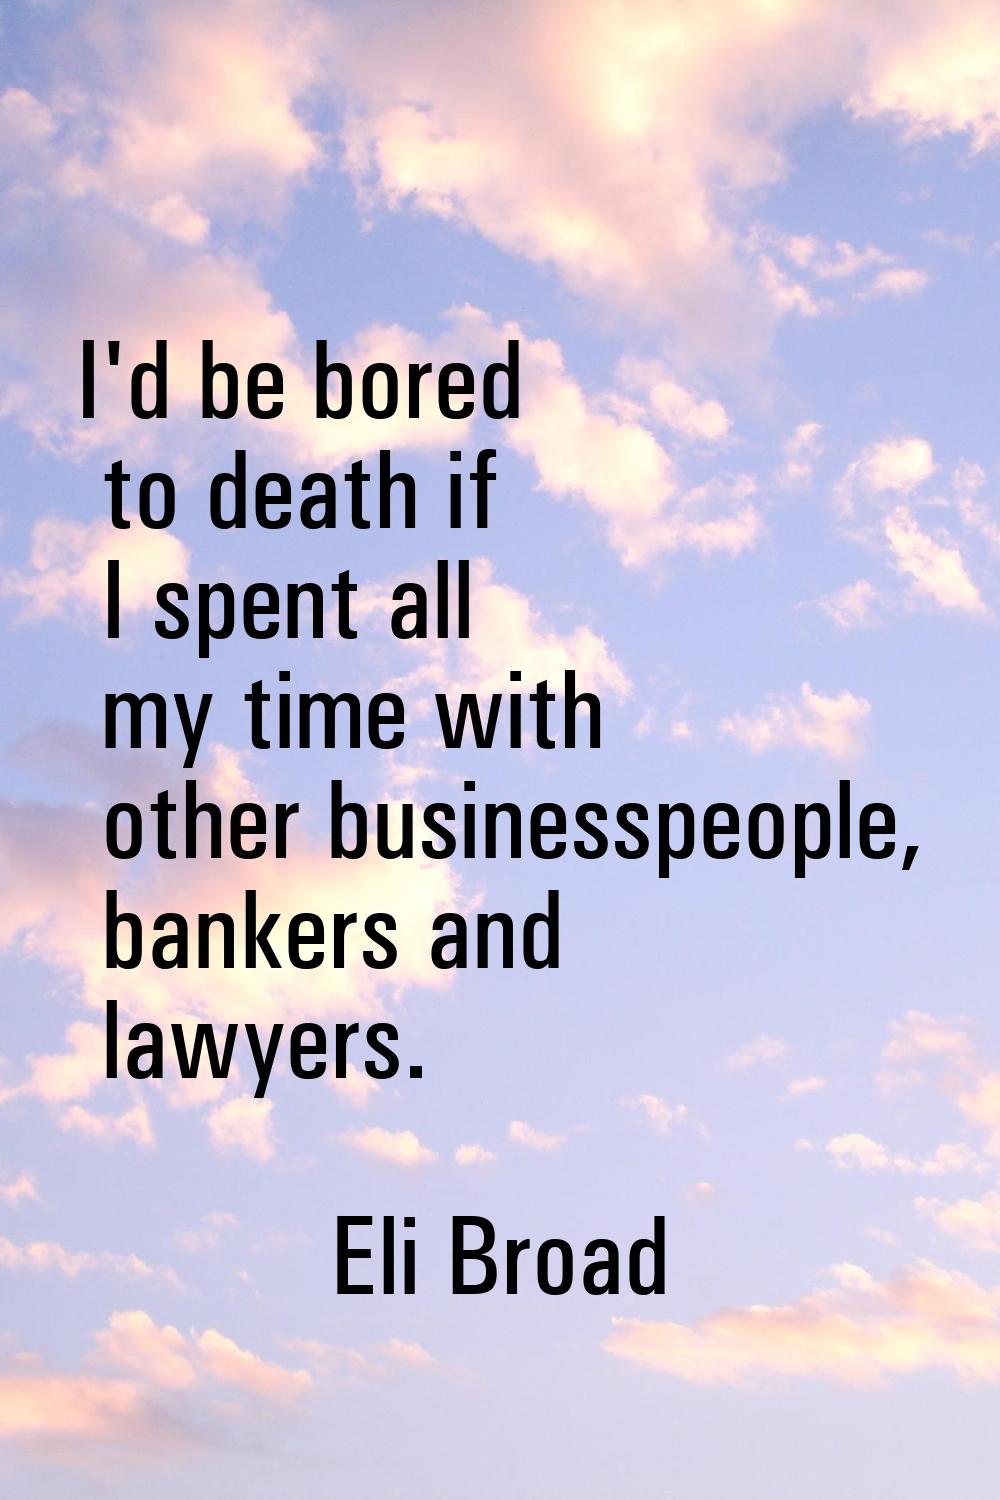 I'd be bored to death if I spent all my time with other businesspeople, bankers and lawyers.